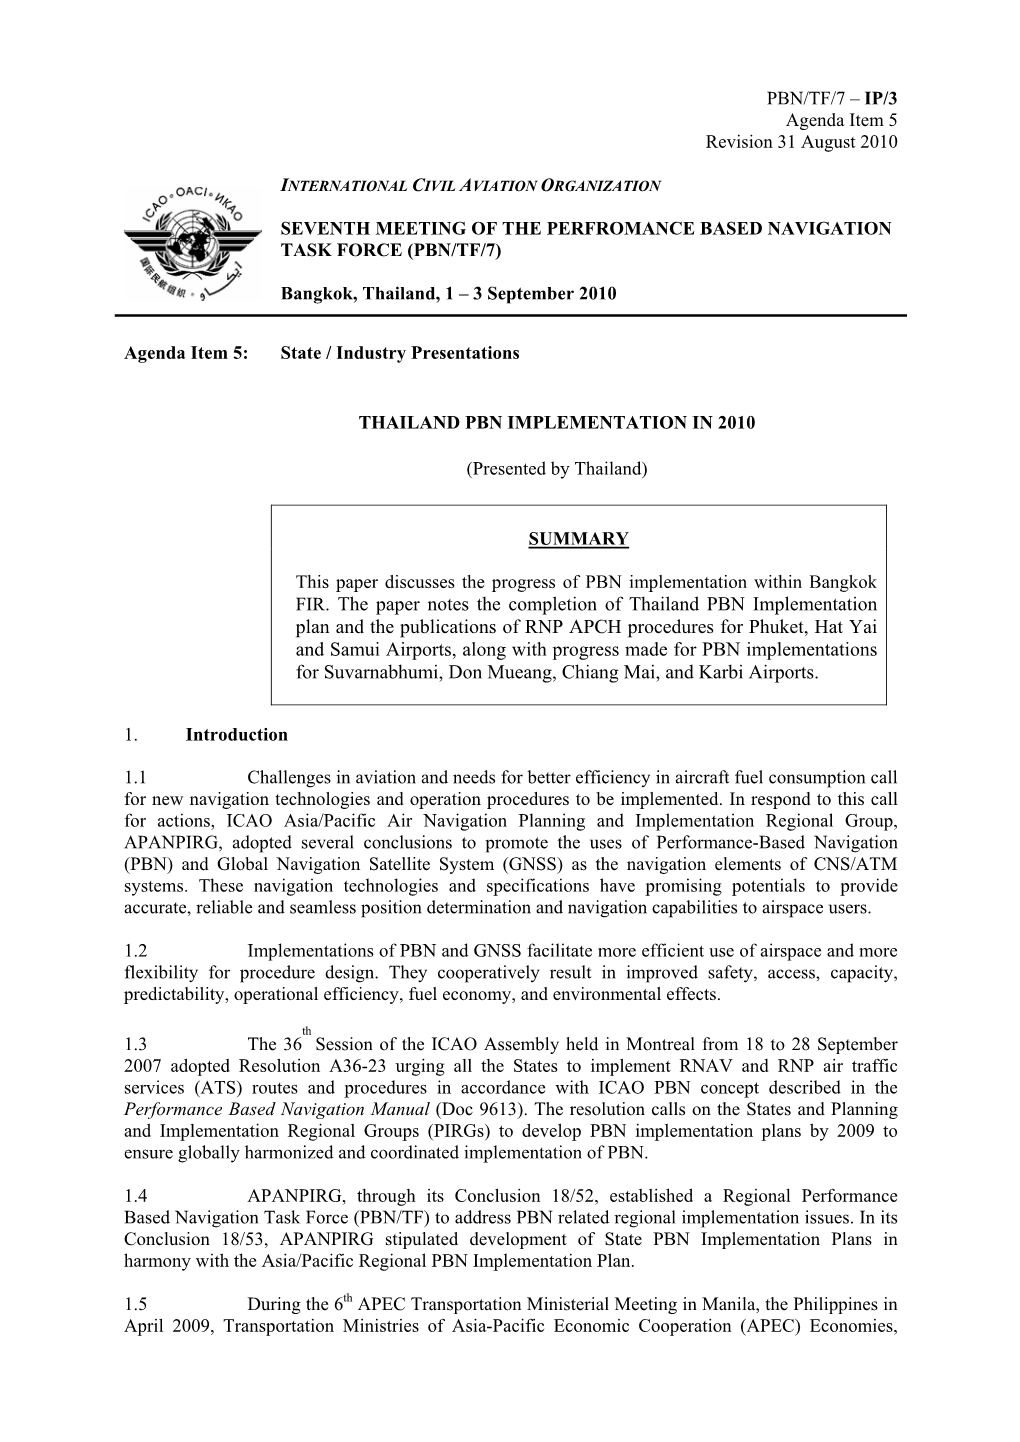 FIR. the Paper Notes the Completion of Thailand PBN Implementation